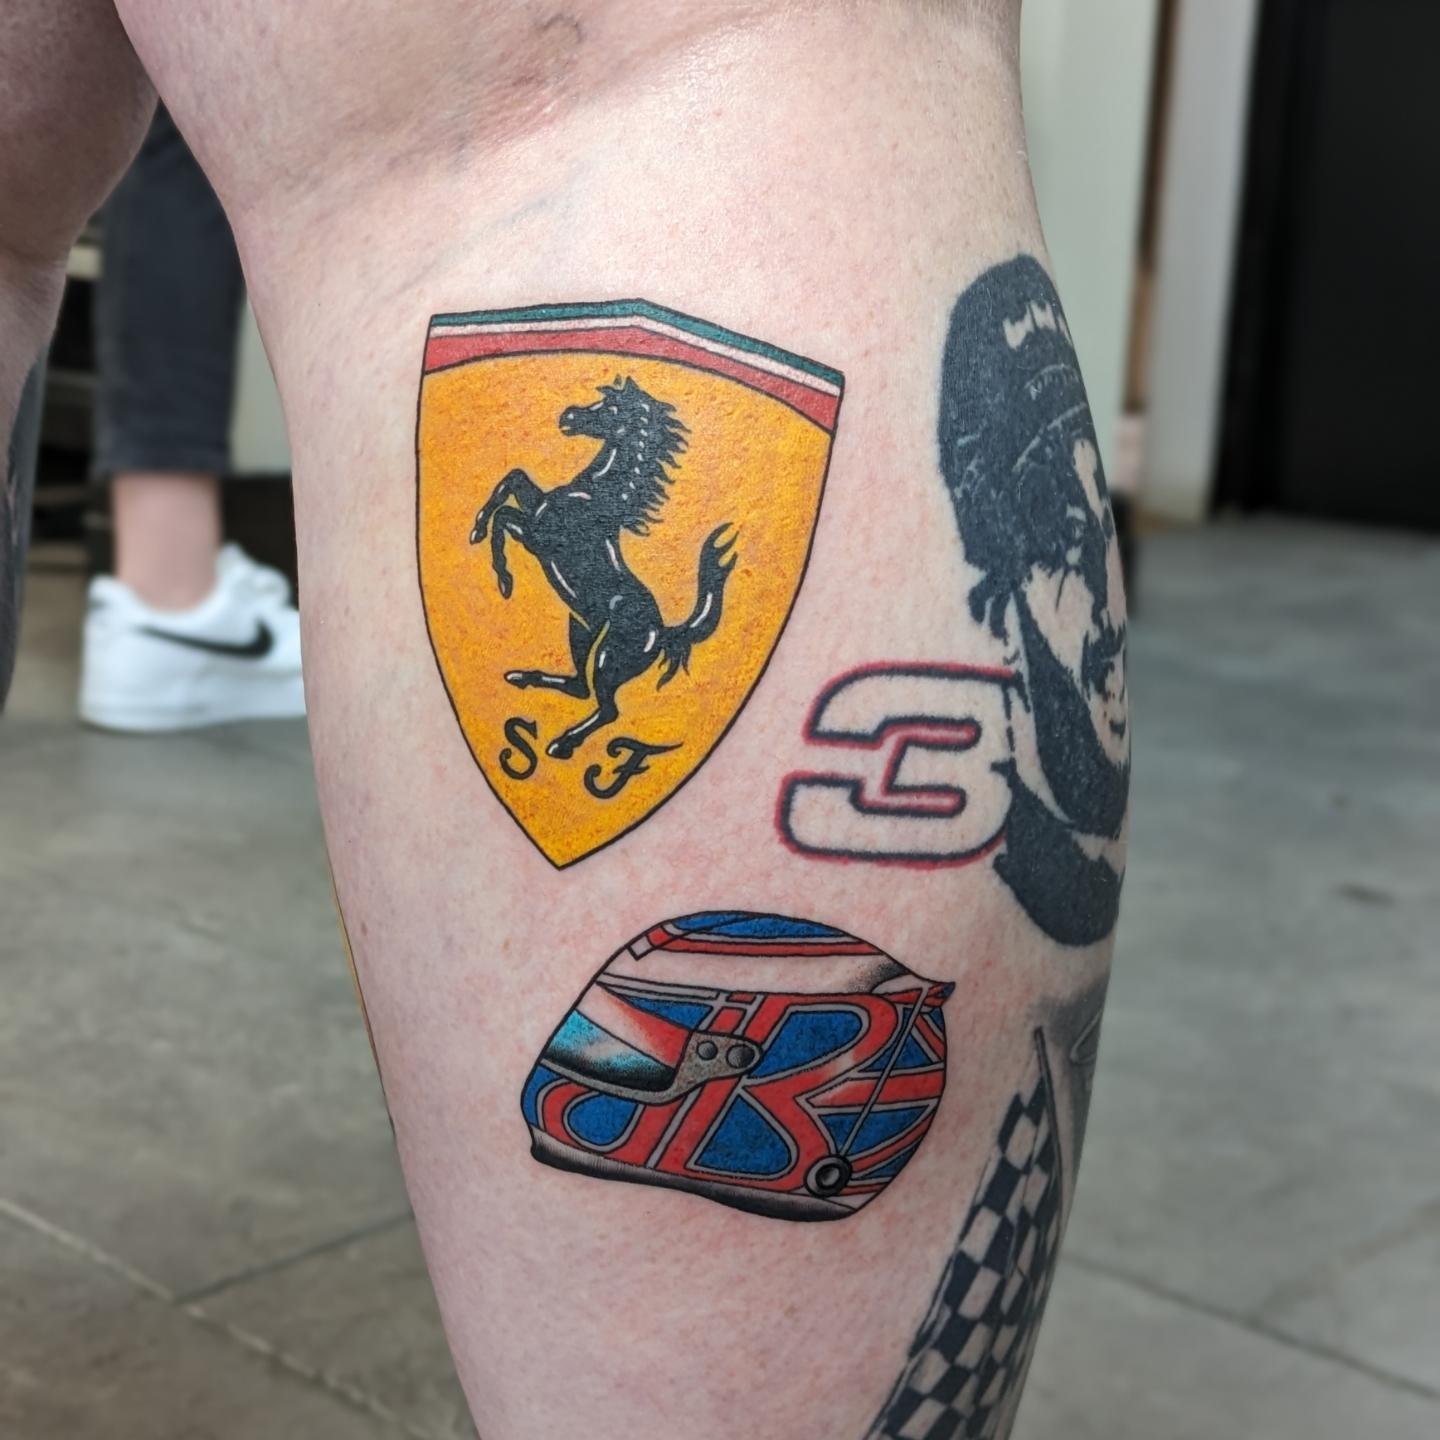 Added more to Lyndseys F1 themed leg today @72tattoo 20th birthday! 

Thanks for sitting so well for these lovely! 💪😎

&bull;&bull;&bull;&bull;&bull;&bull;&bull;&bull;&bull;&bull;&bull;&bull;&bull;&bull;&bull;&bull;&bull;&bull;&bull;&bull;&bull;&bu